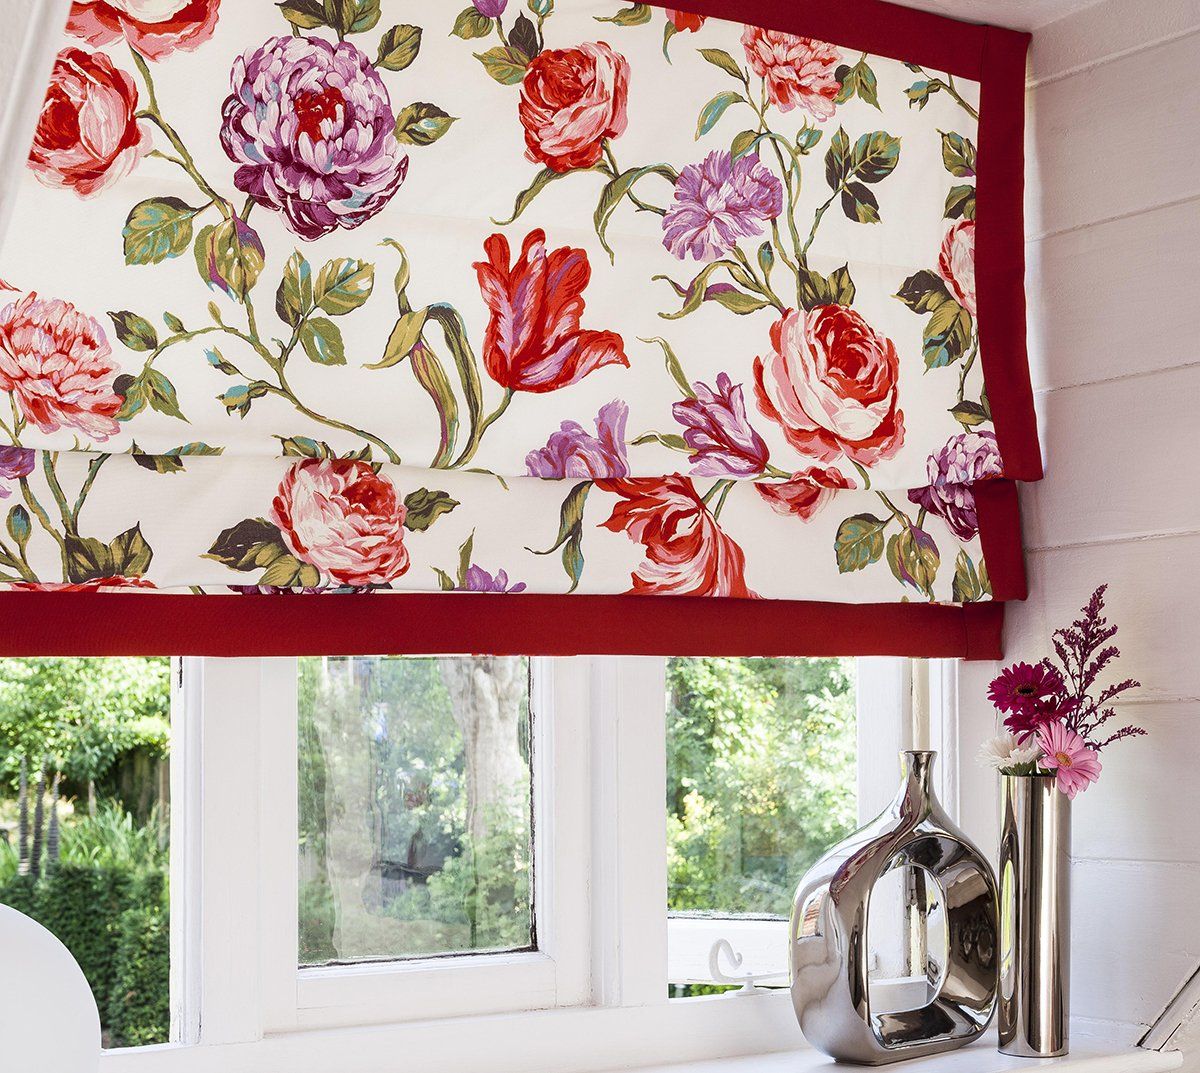 Quality custom made blinds in Portsmouth